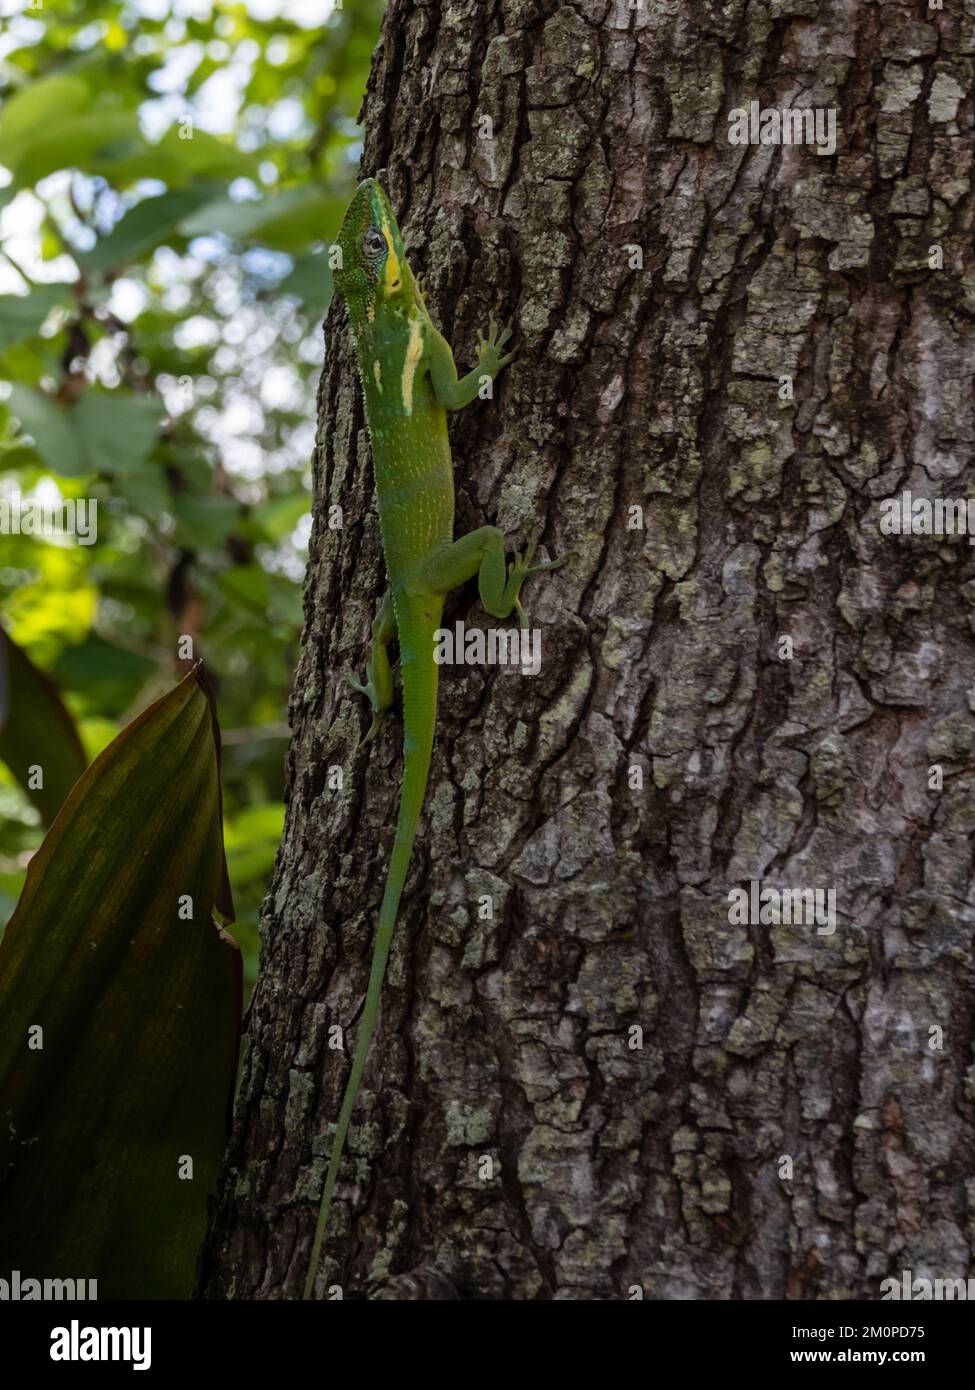 A knight anole, Anolis equestris, also known as Cuban knight anole or Cuban giant anole, resting on a tree. Stock Photo